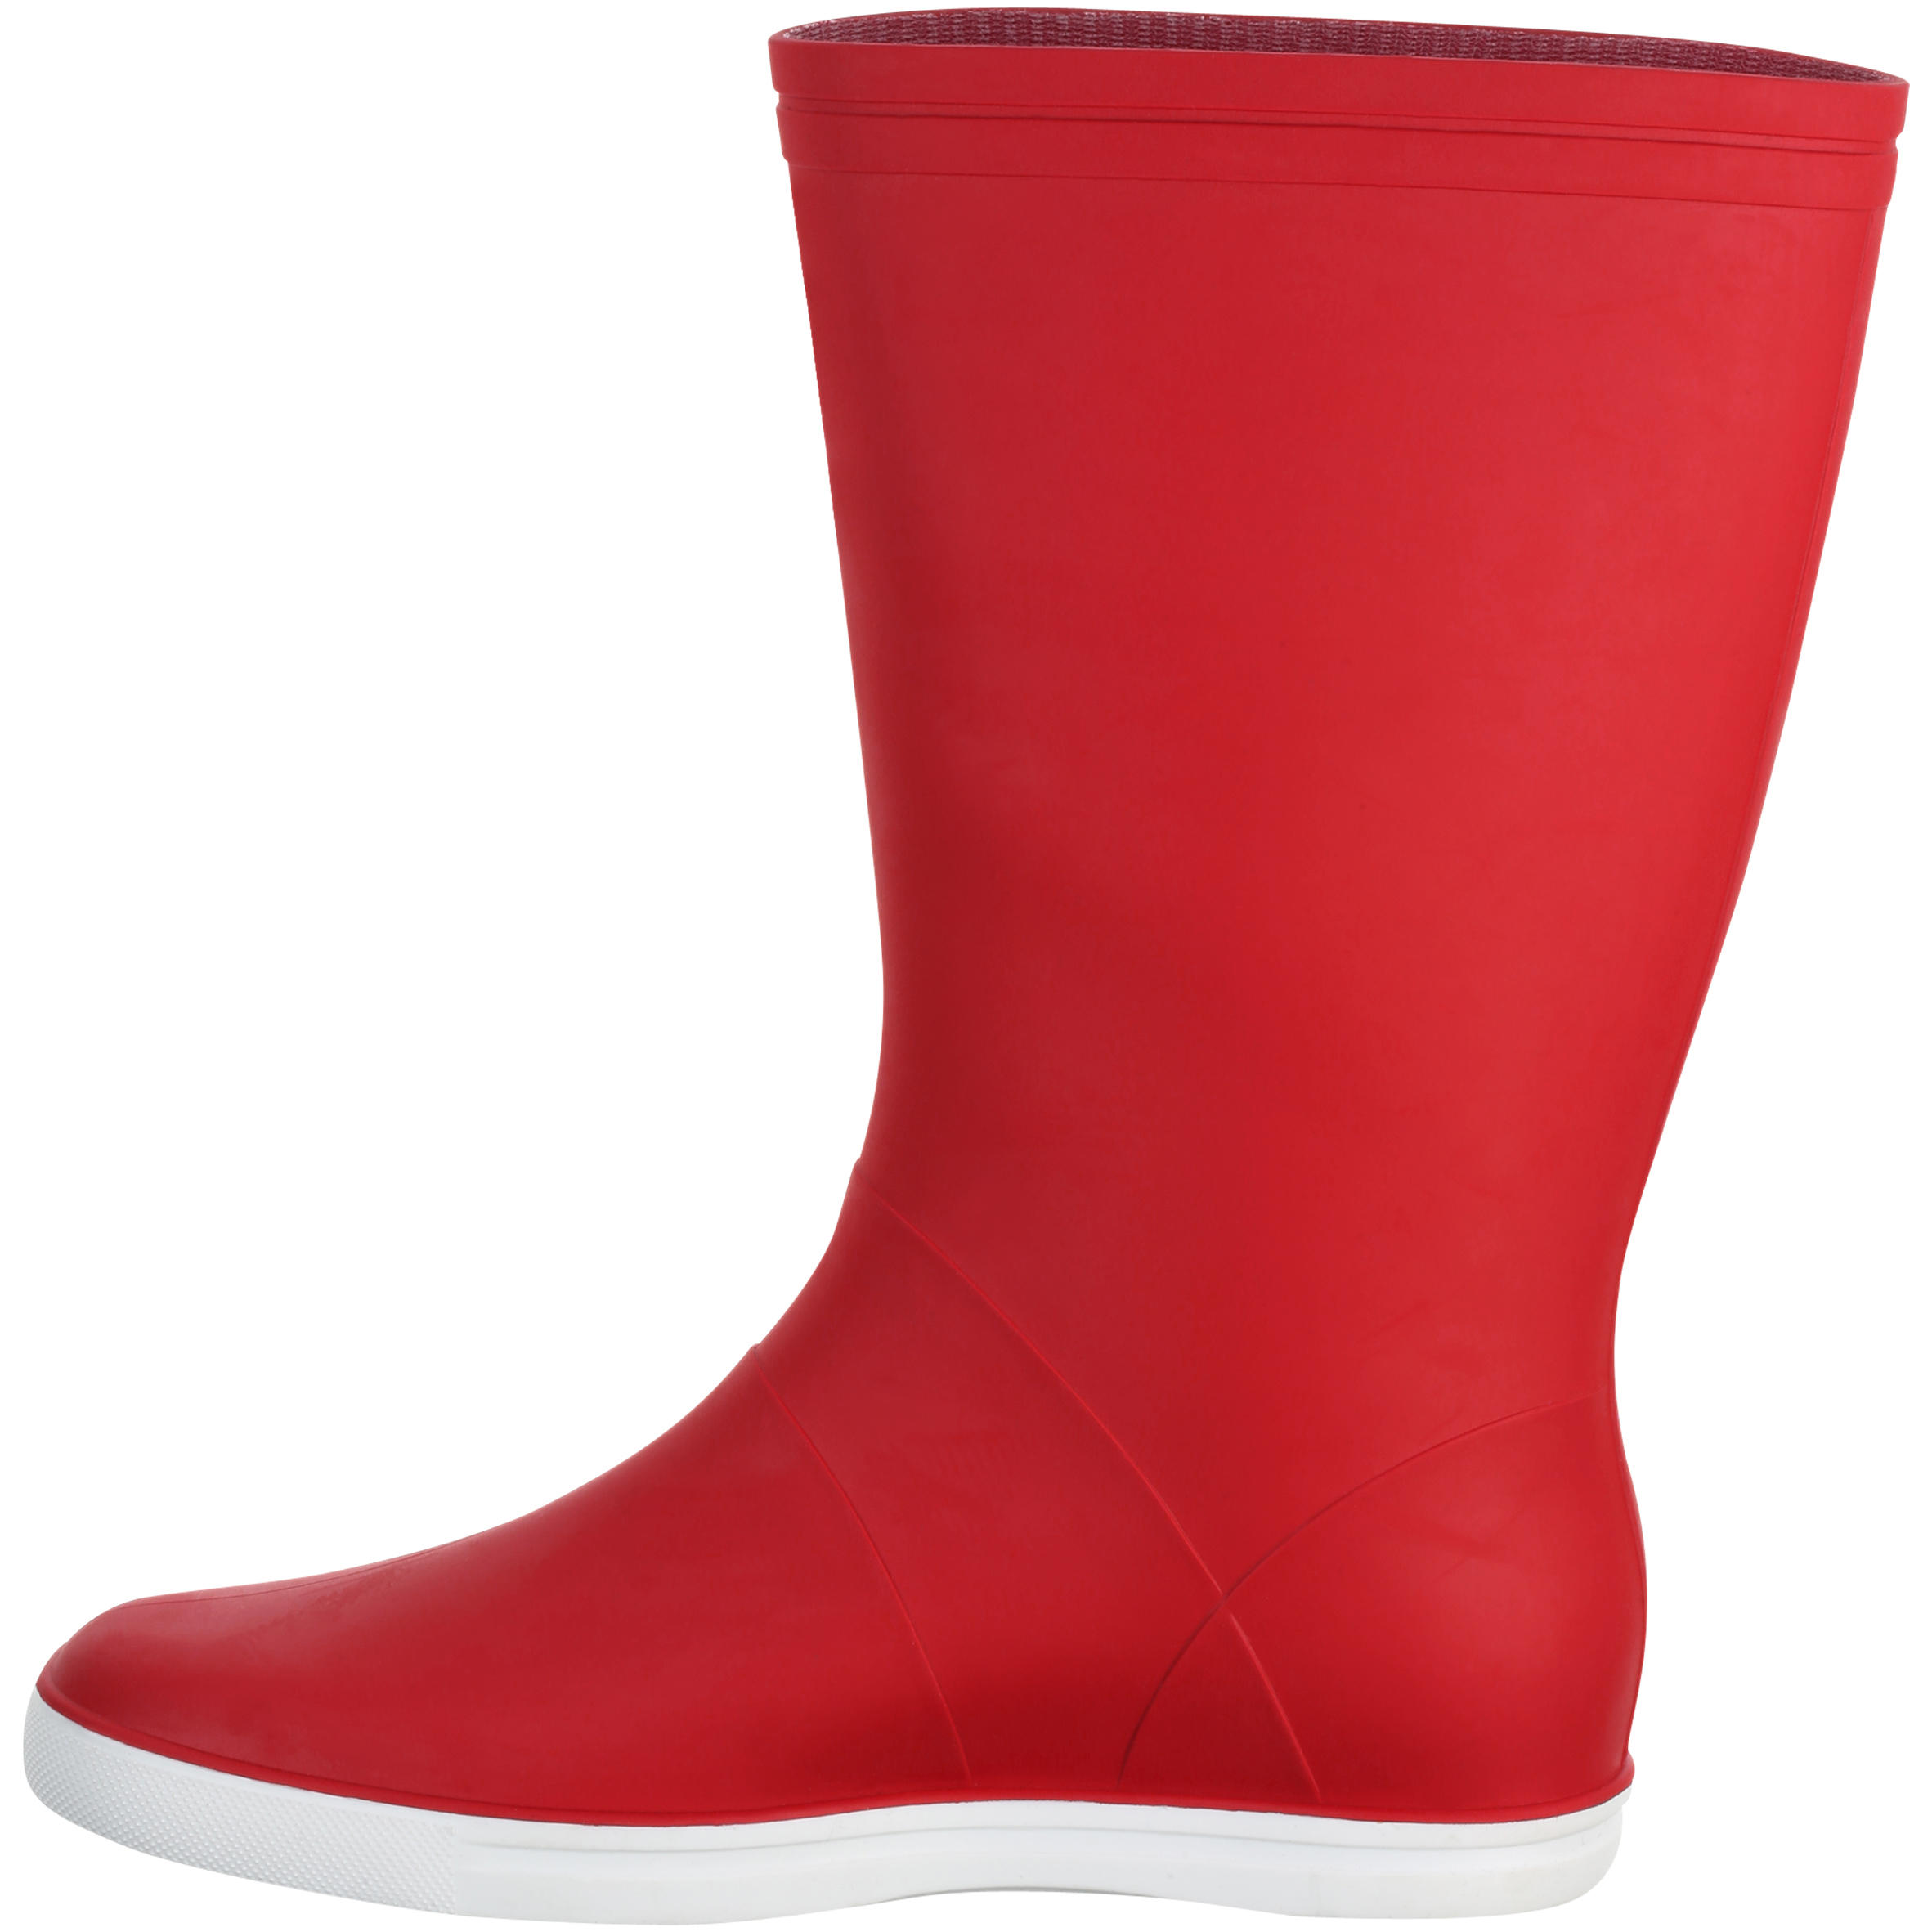 Sailing 100 Adult Wellies  - Red 4/12